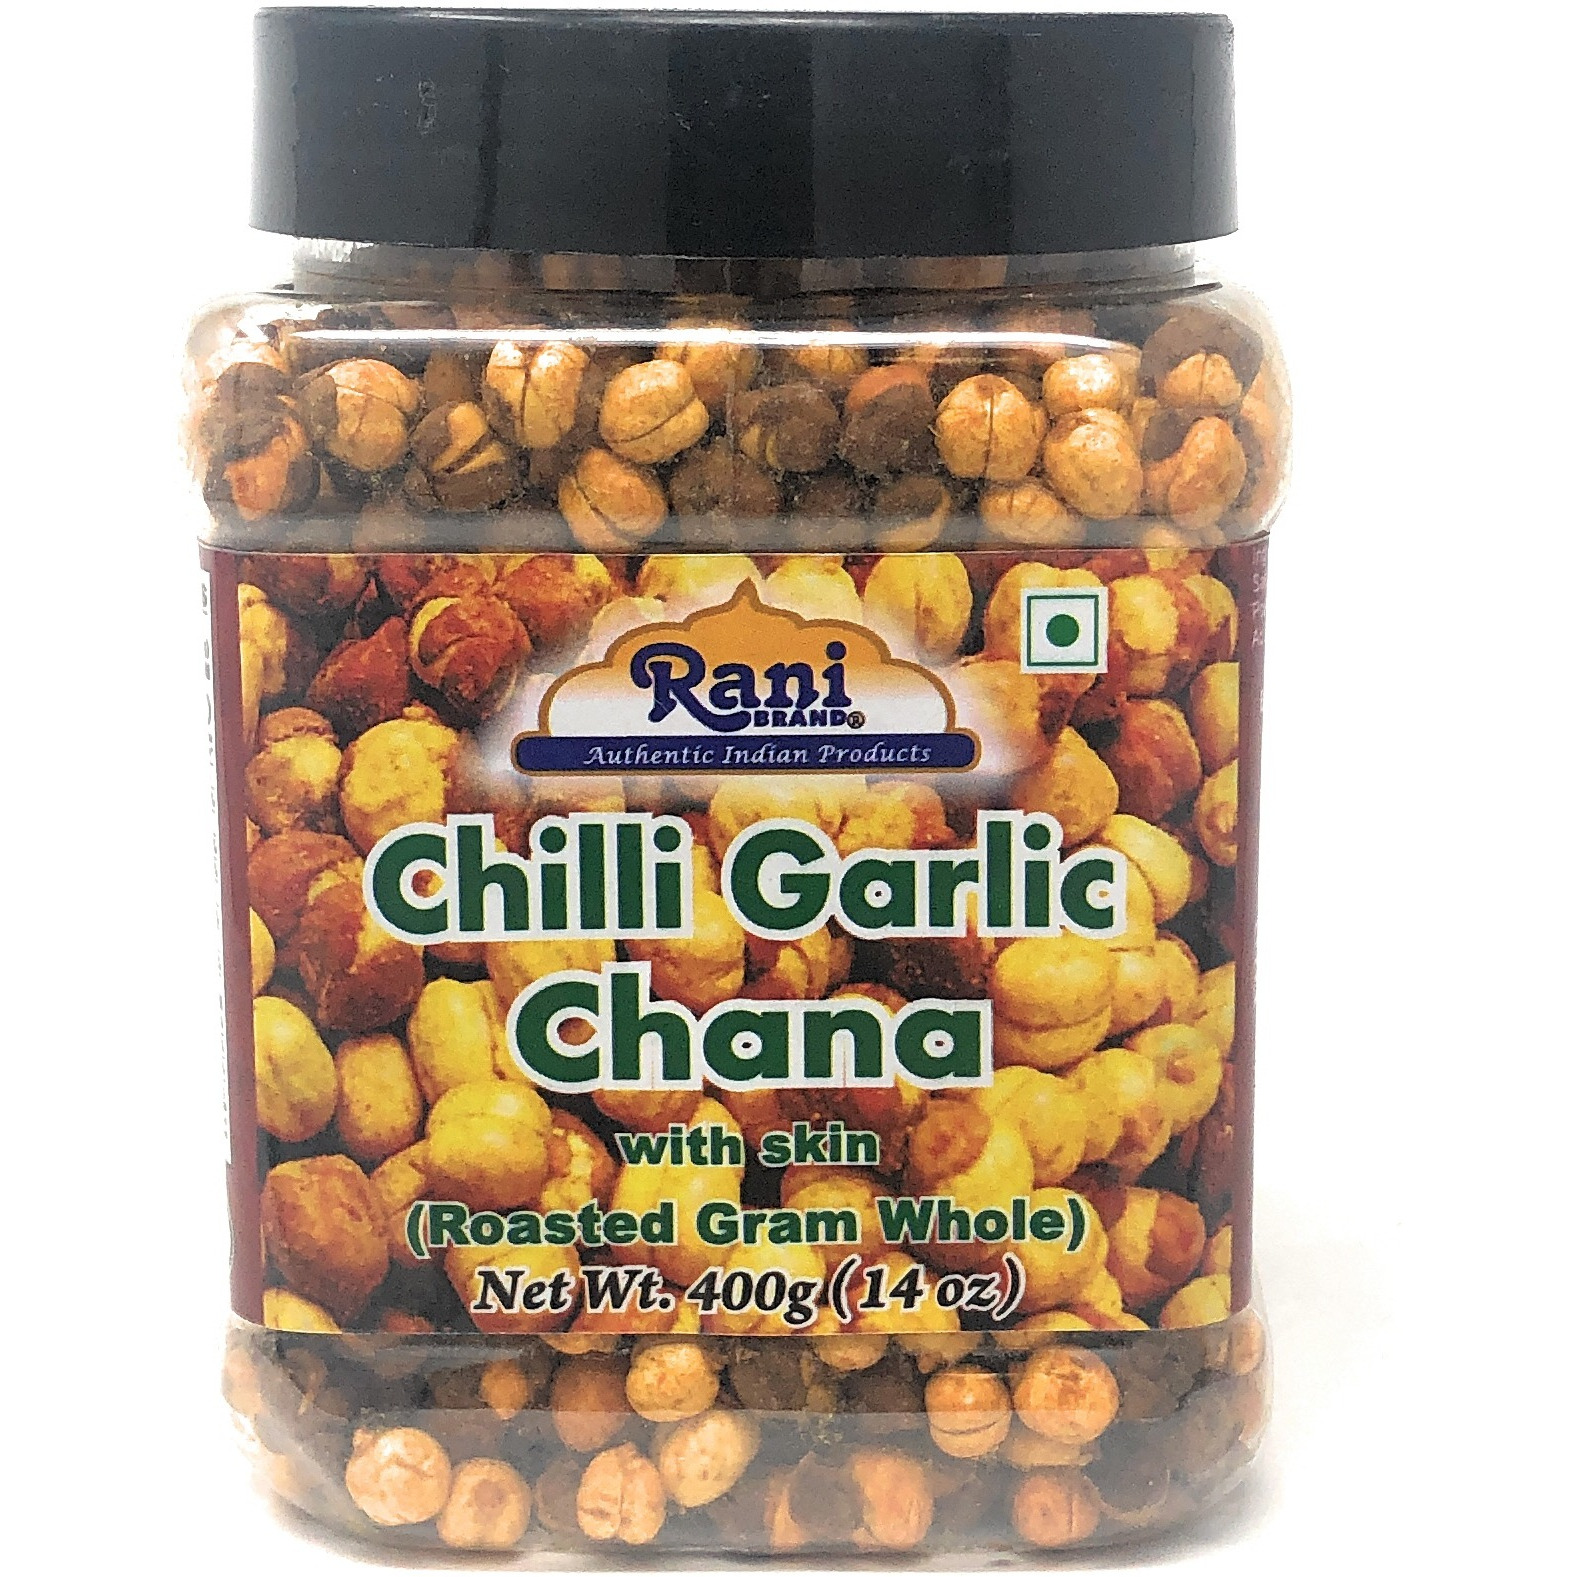 Rani Roasted Chana (Chickpeas) Chilli Garlic Flavor 14oz (400g) ~ All Natural | Vegan | No Preservatives | No Colors | Great Snack, Ready to Eat, Seasoned with 6 Spices, Indian Origin